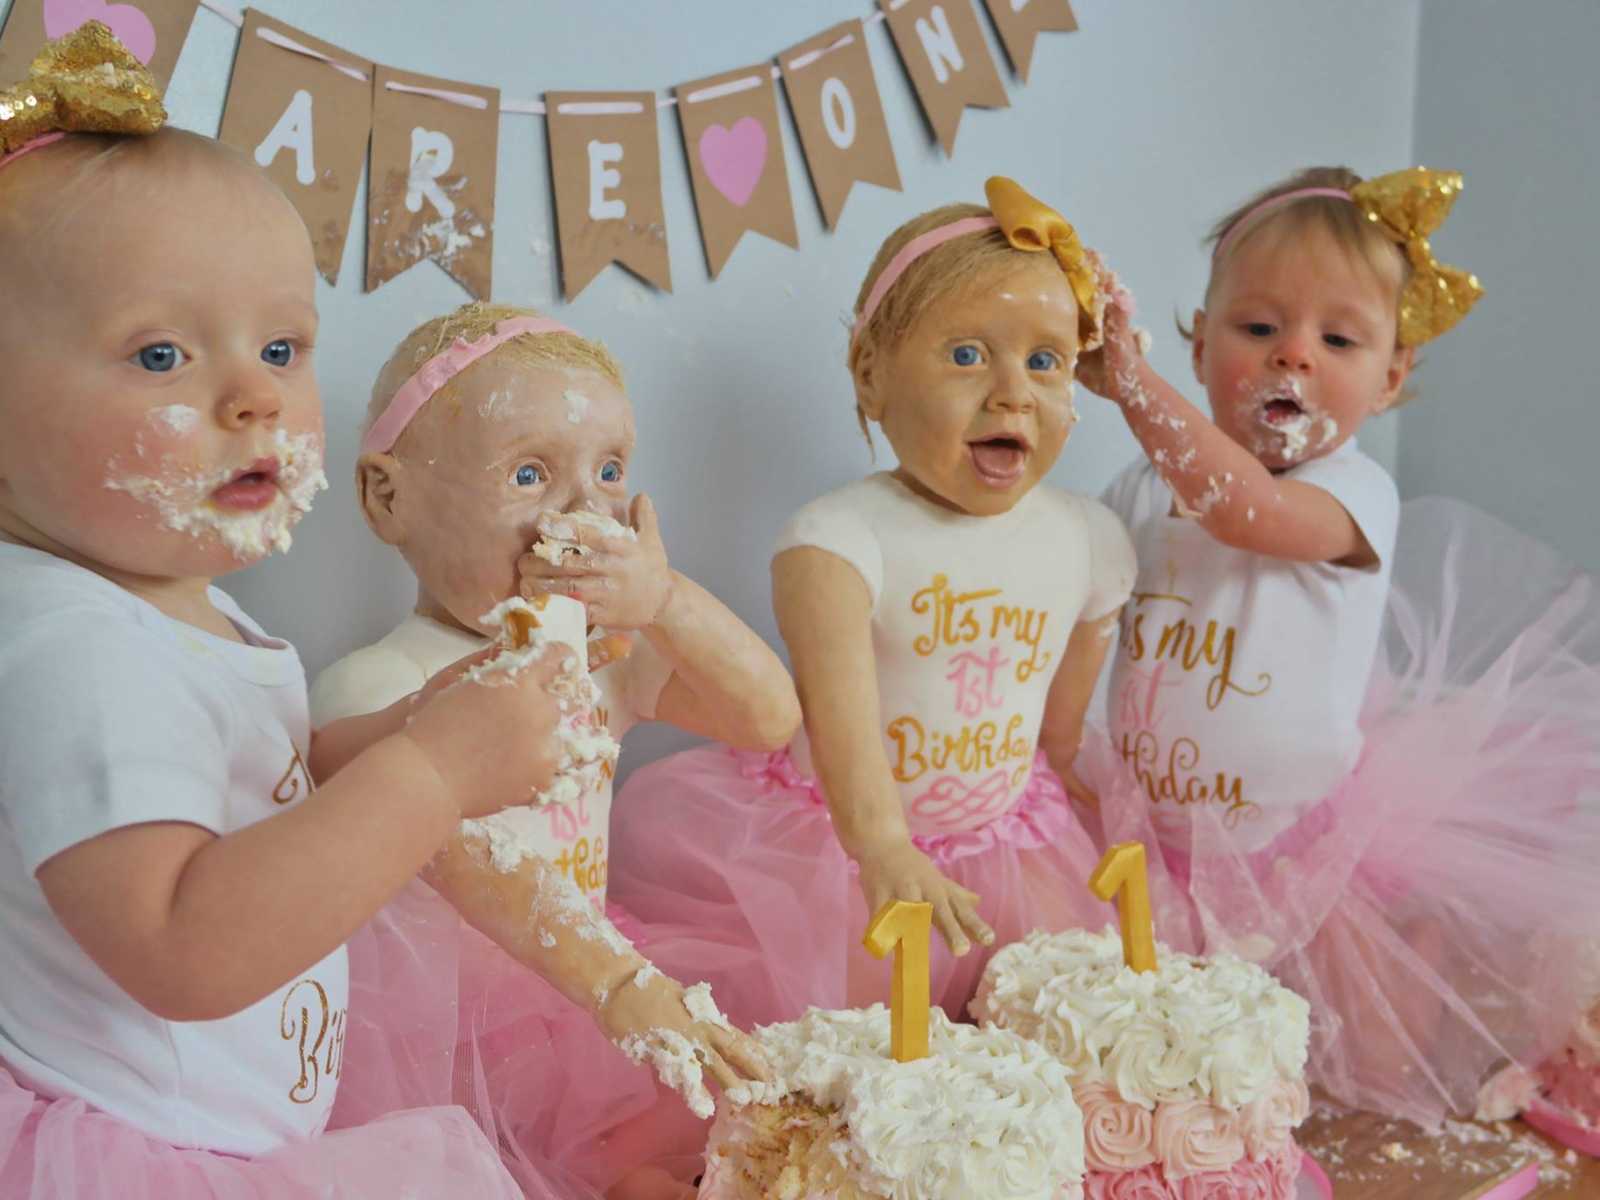 two cakes that resemble real babies sit in between two infants in gold bow and pink tutu with cake on their face